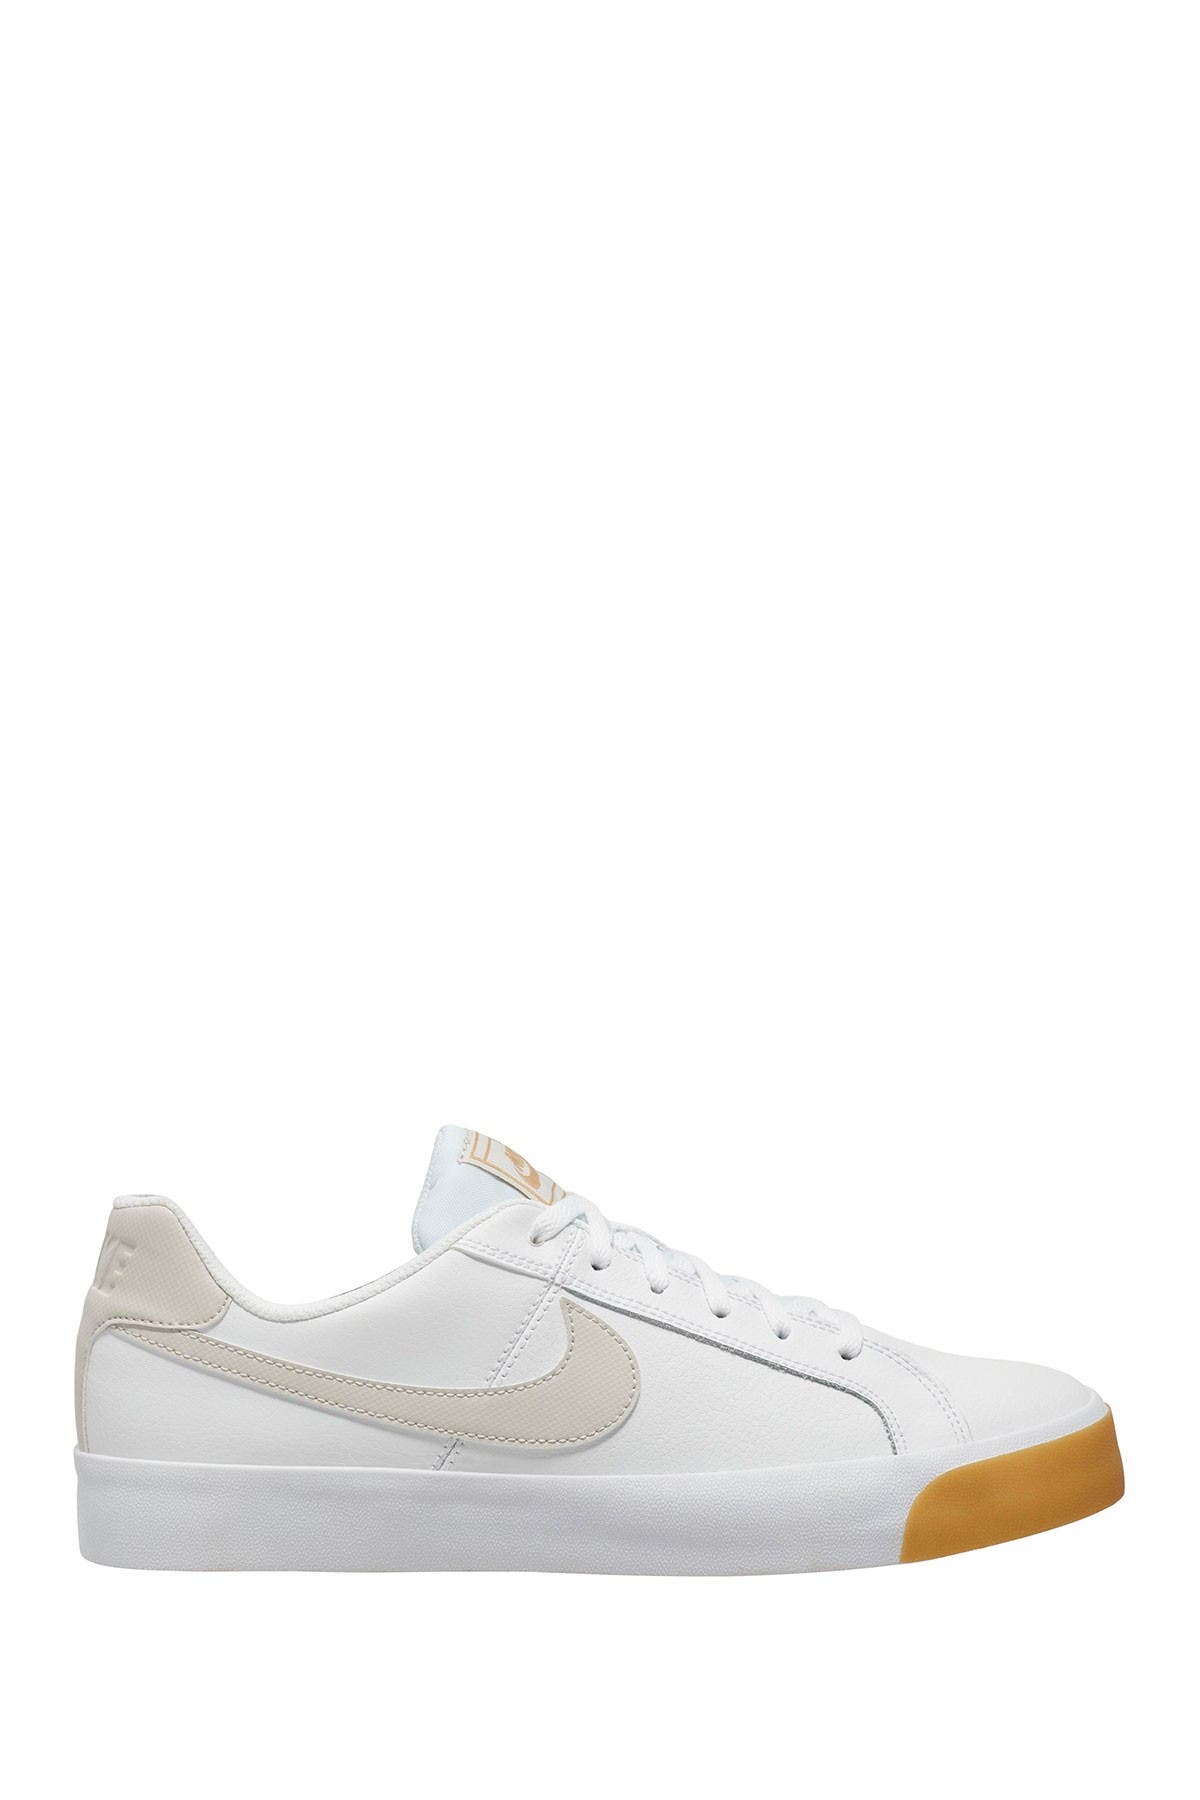 Nike | Court Royale Leather Sneaker 